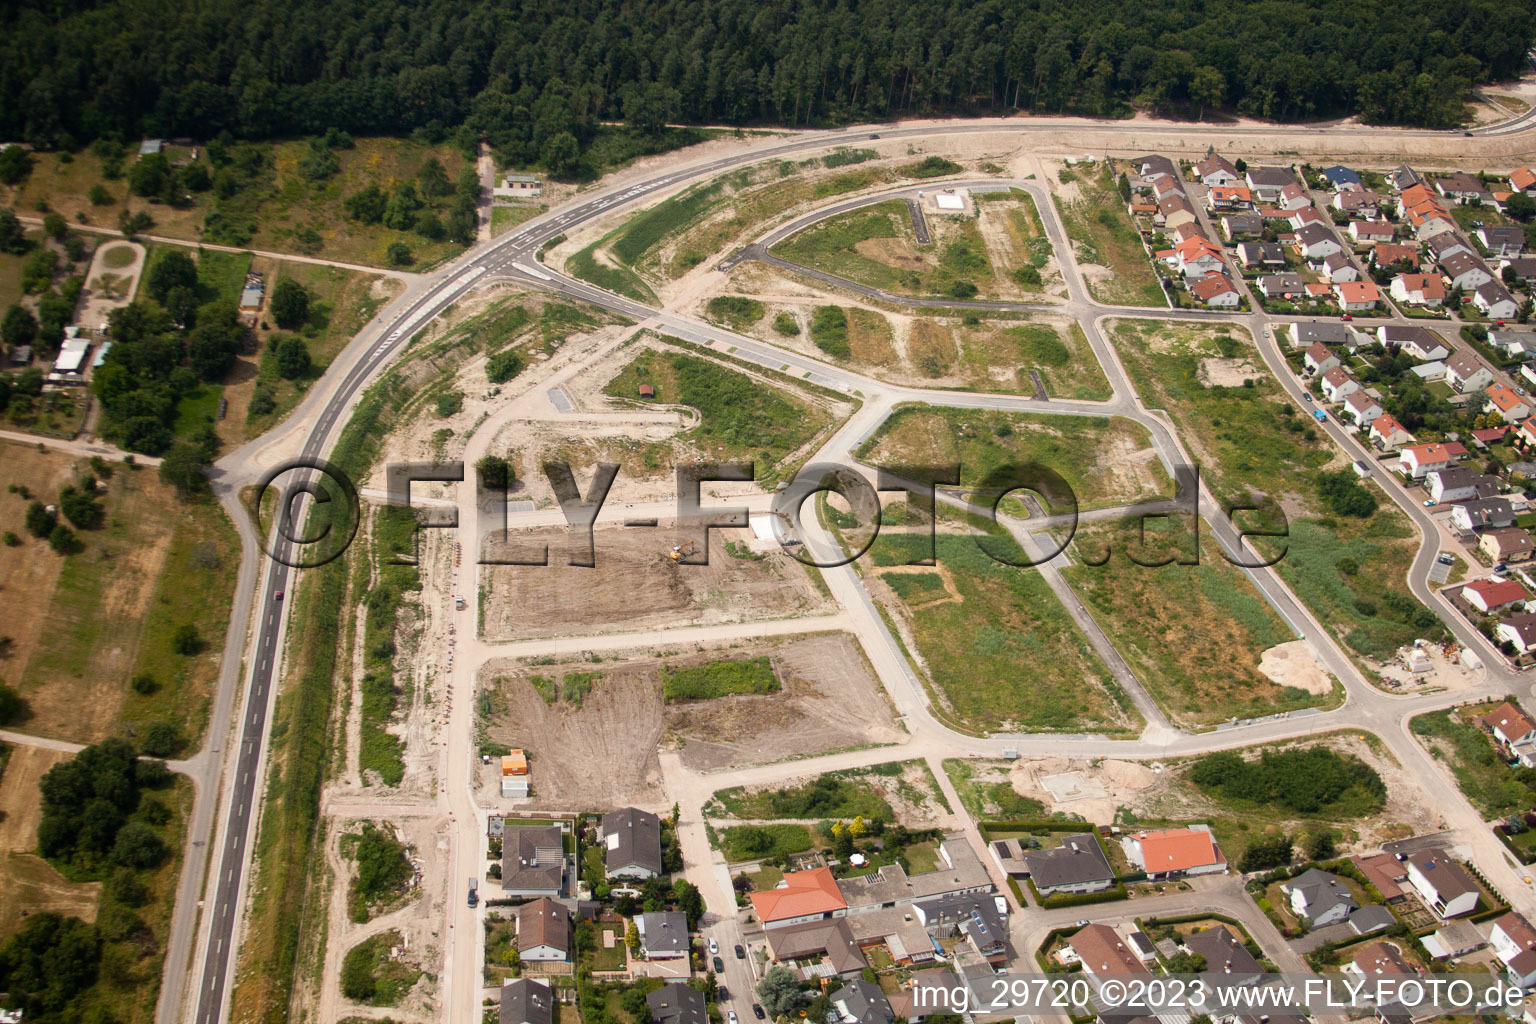 New development area west in Jockgrim in the state Rhineland-Palatinate, Germany from a drone